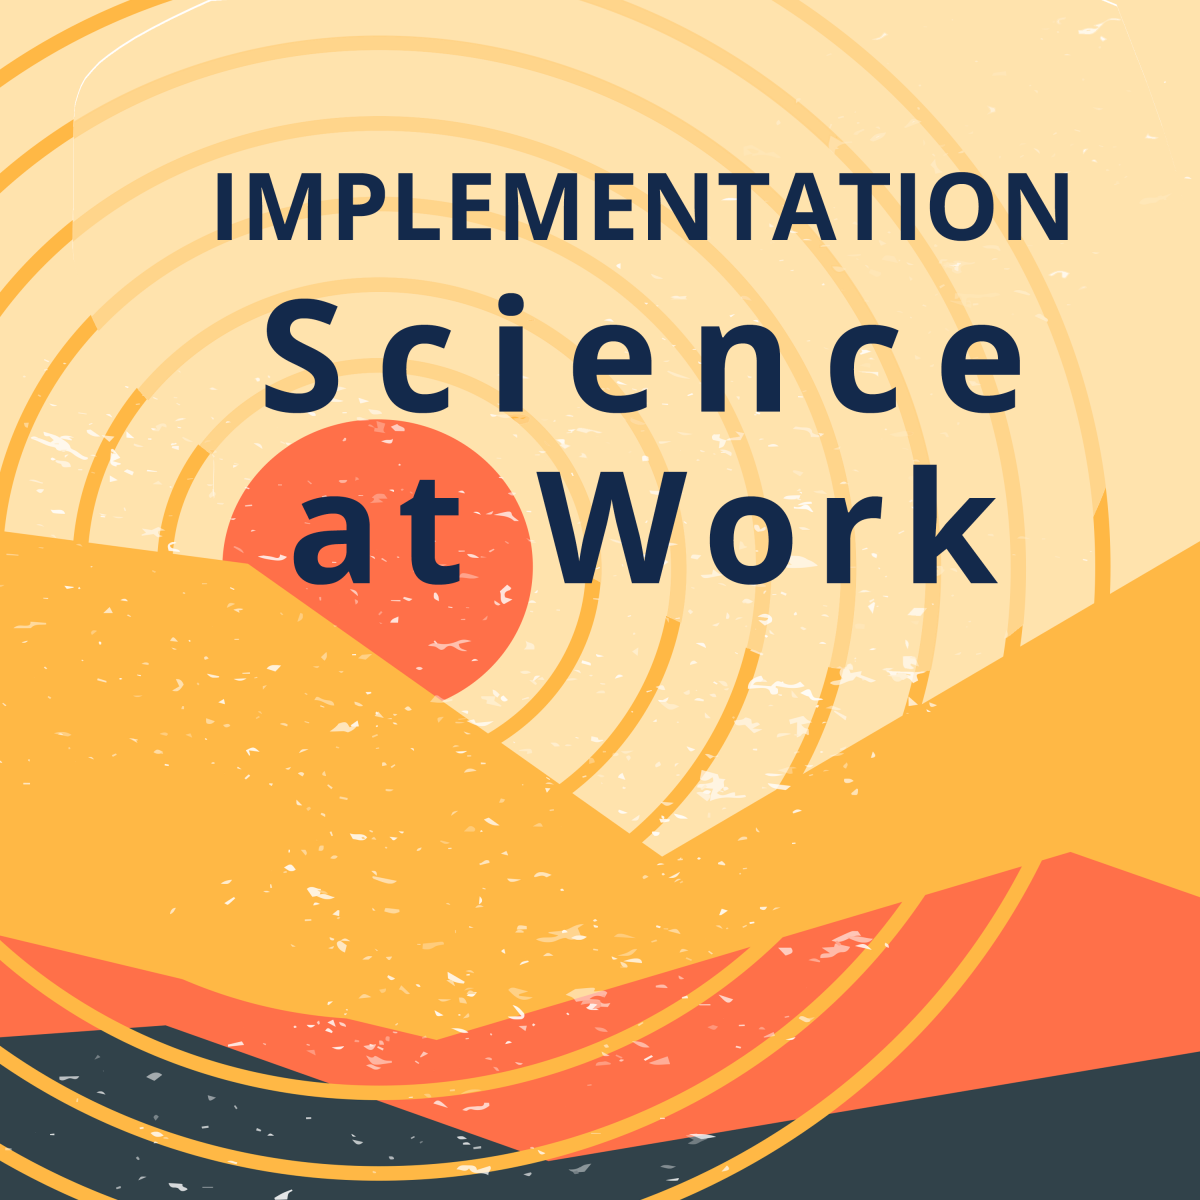 Implementation Science at Work